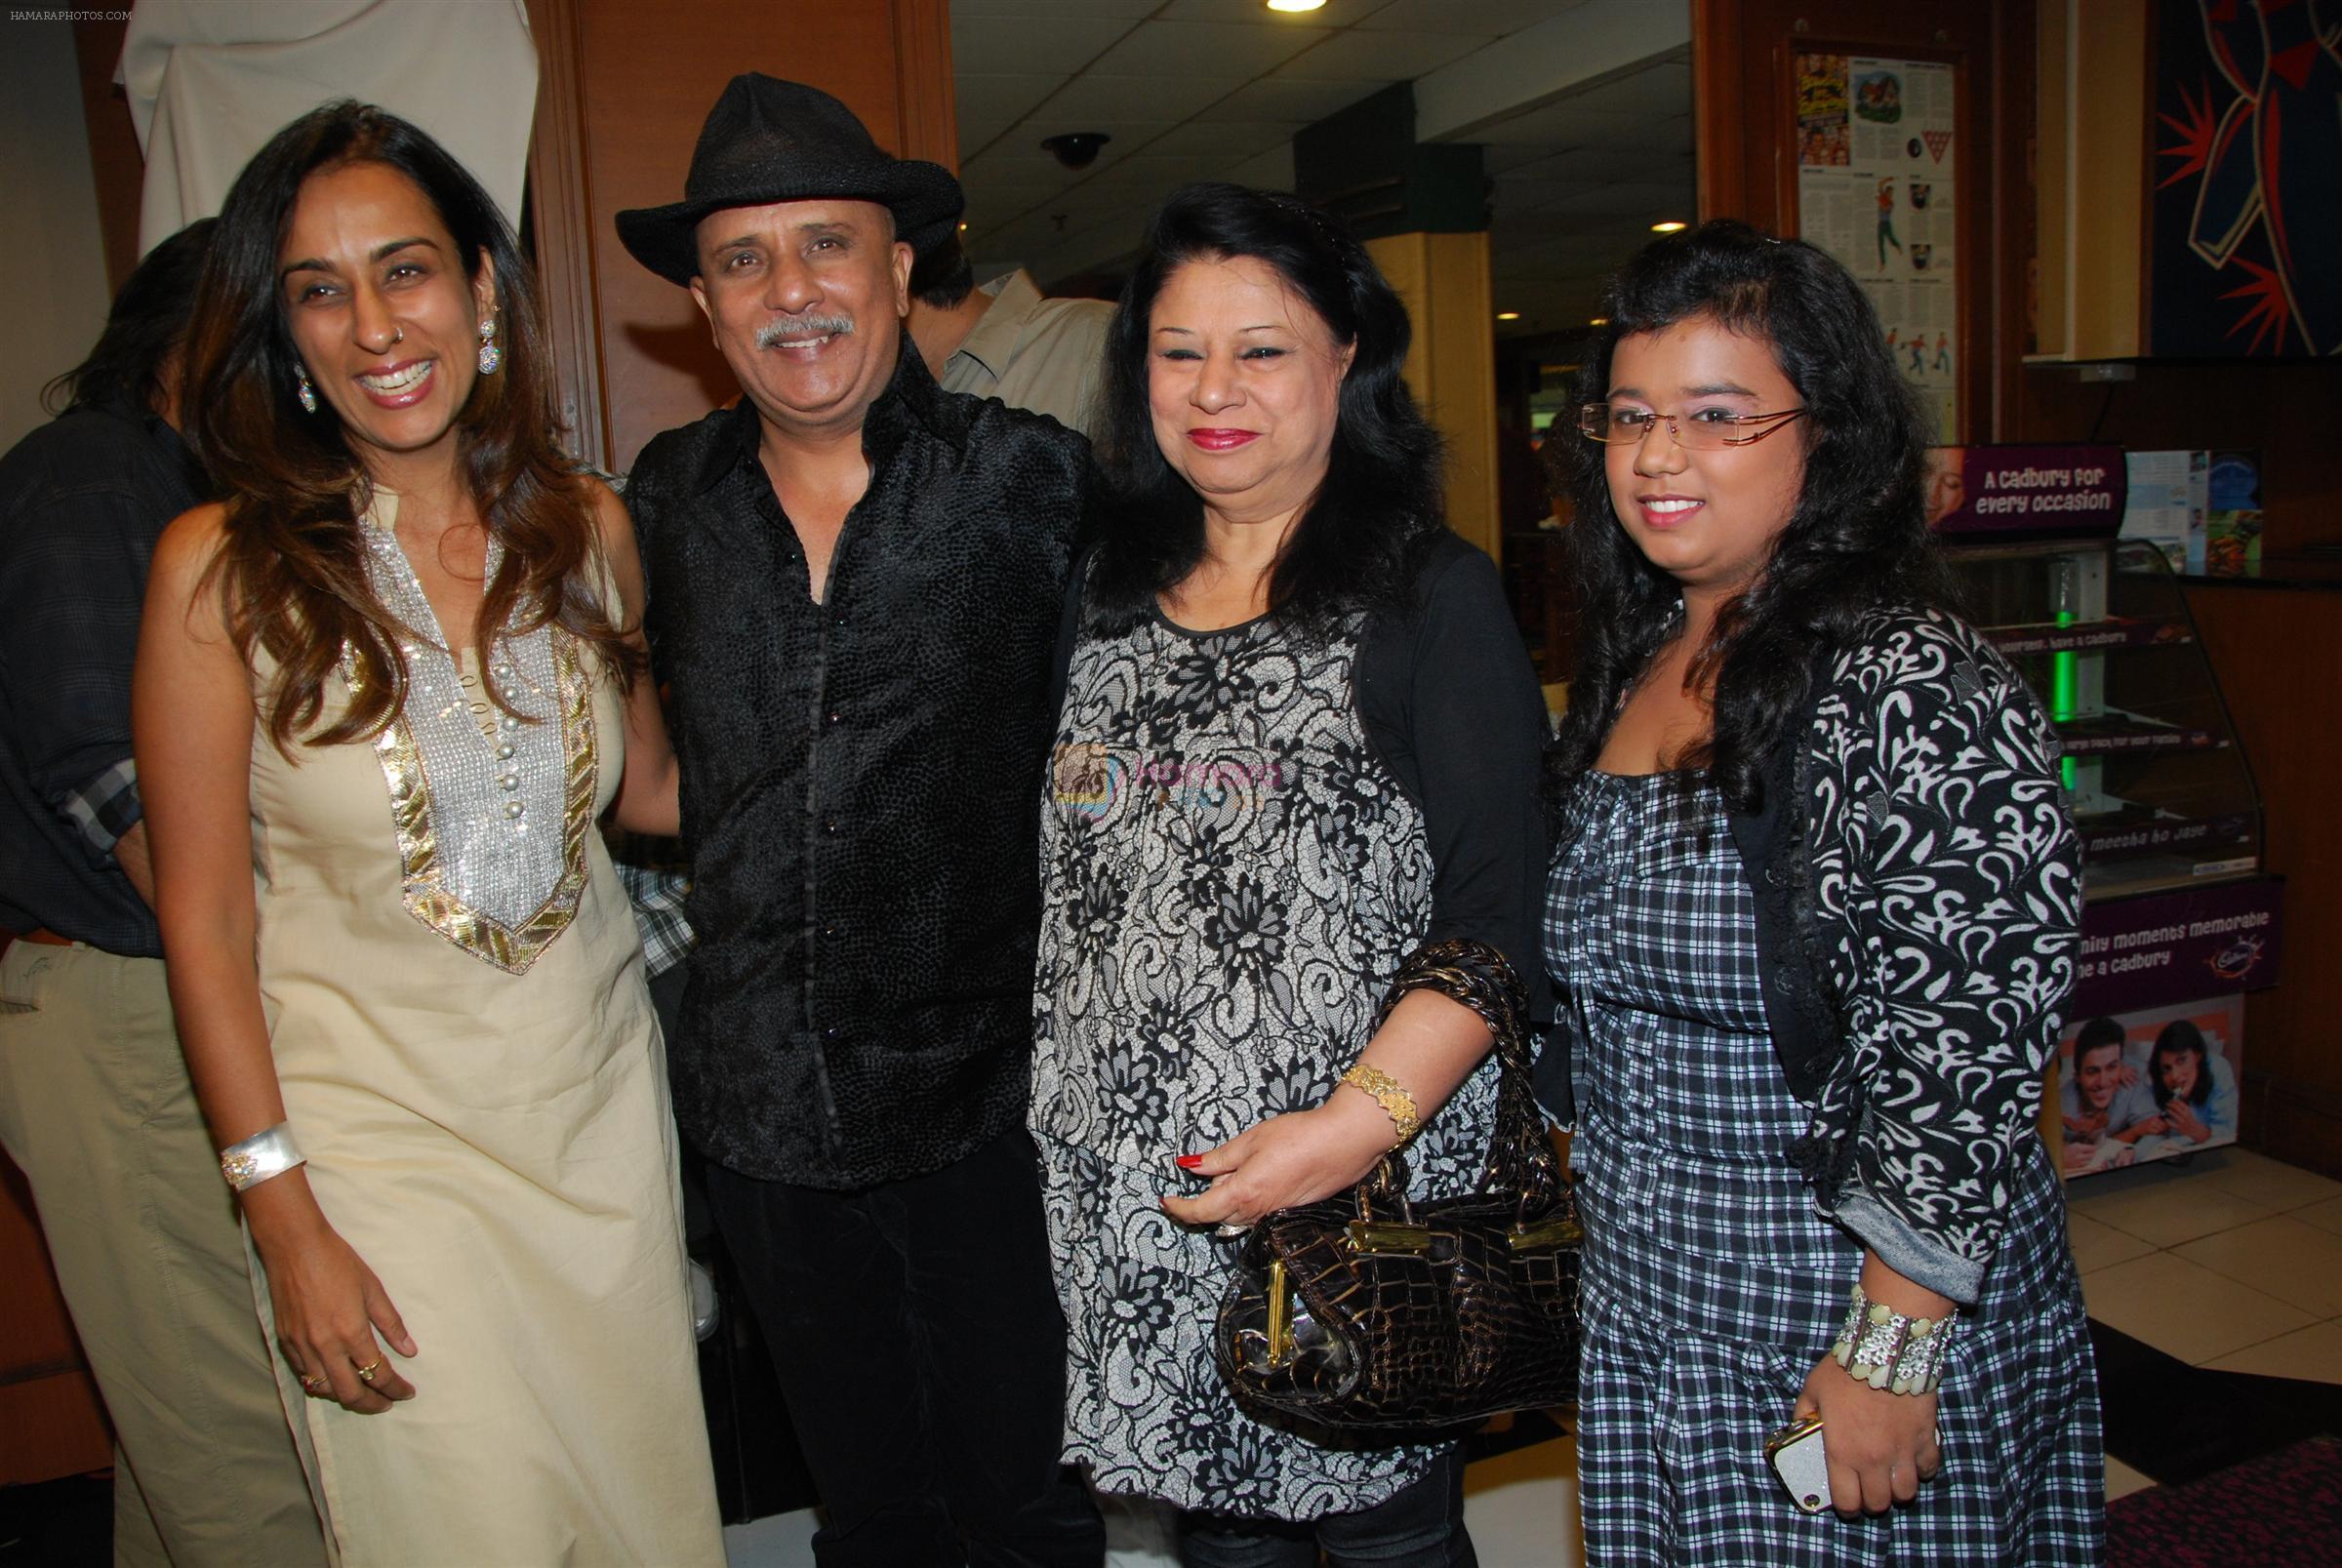 Deeya Singh with Rajesh Puri at the Celebration of the Completion Party of 100 Episodes of PARVARISH kuch khatti kuch meethi in bowling alley on 7th April 2012